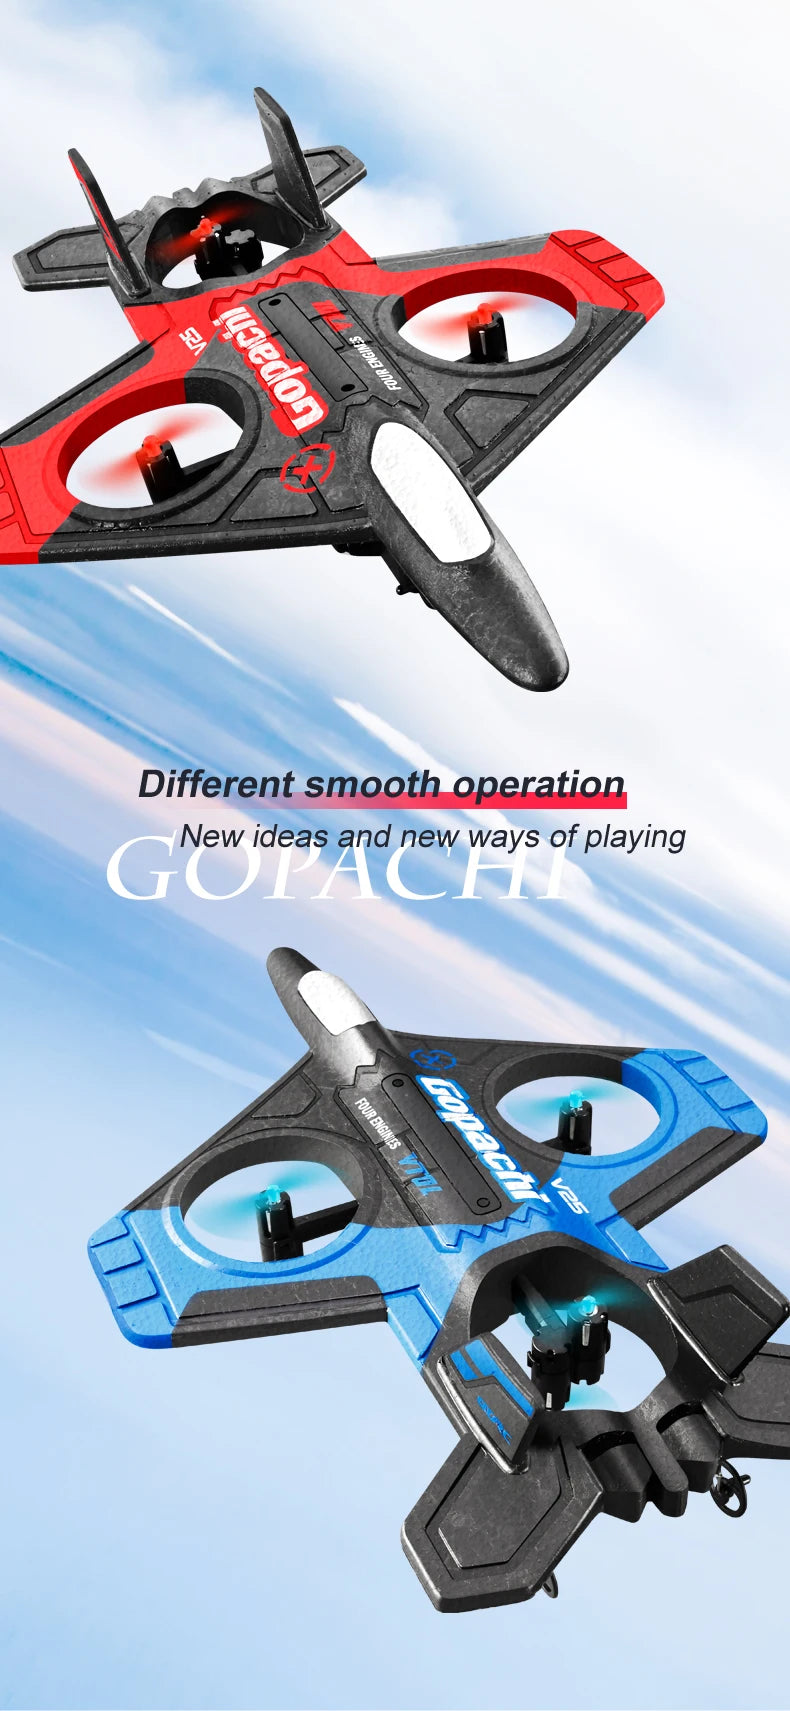 Package Included: 1 * Remote control aircraft 1 * A pair of propellers 1*